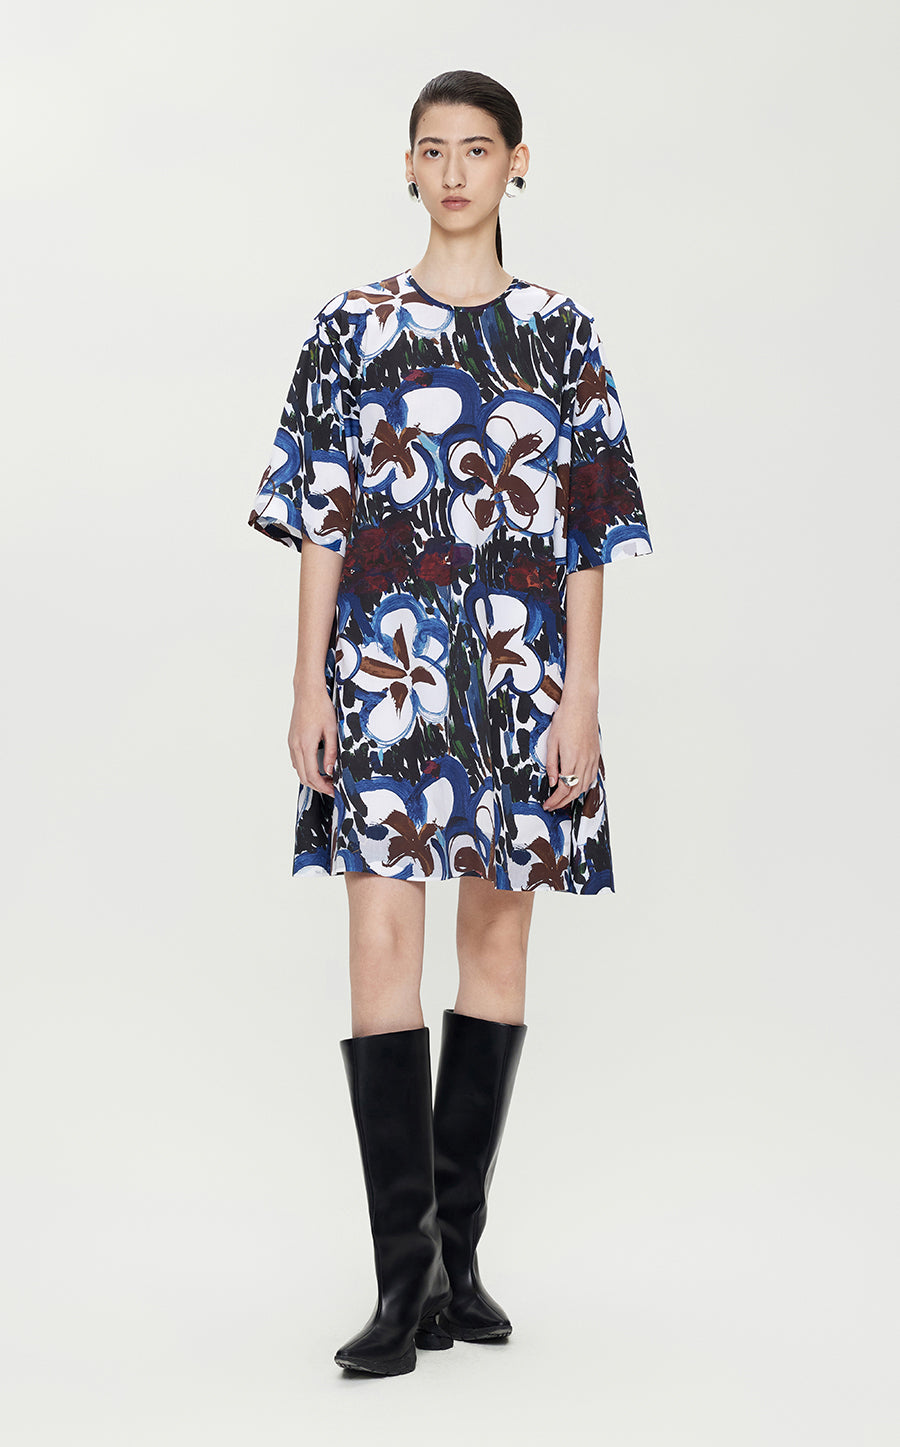 Dress / JNBY Oversized Miao-inspired Floral Prints Dress